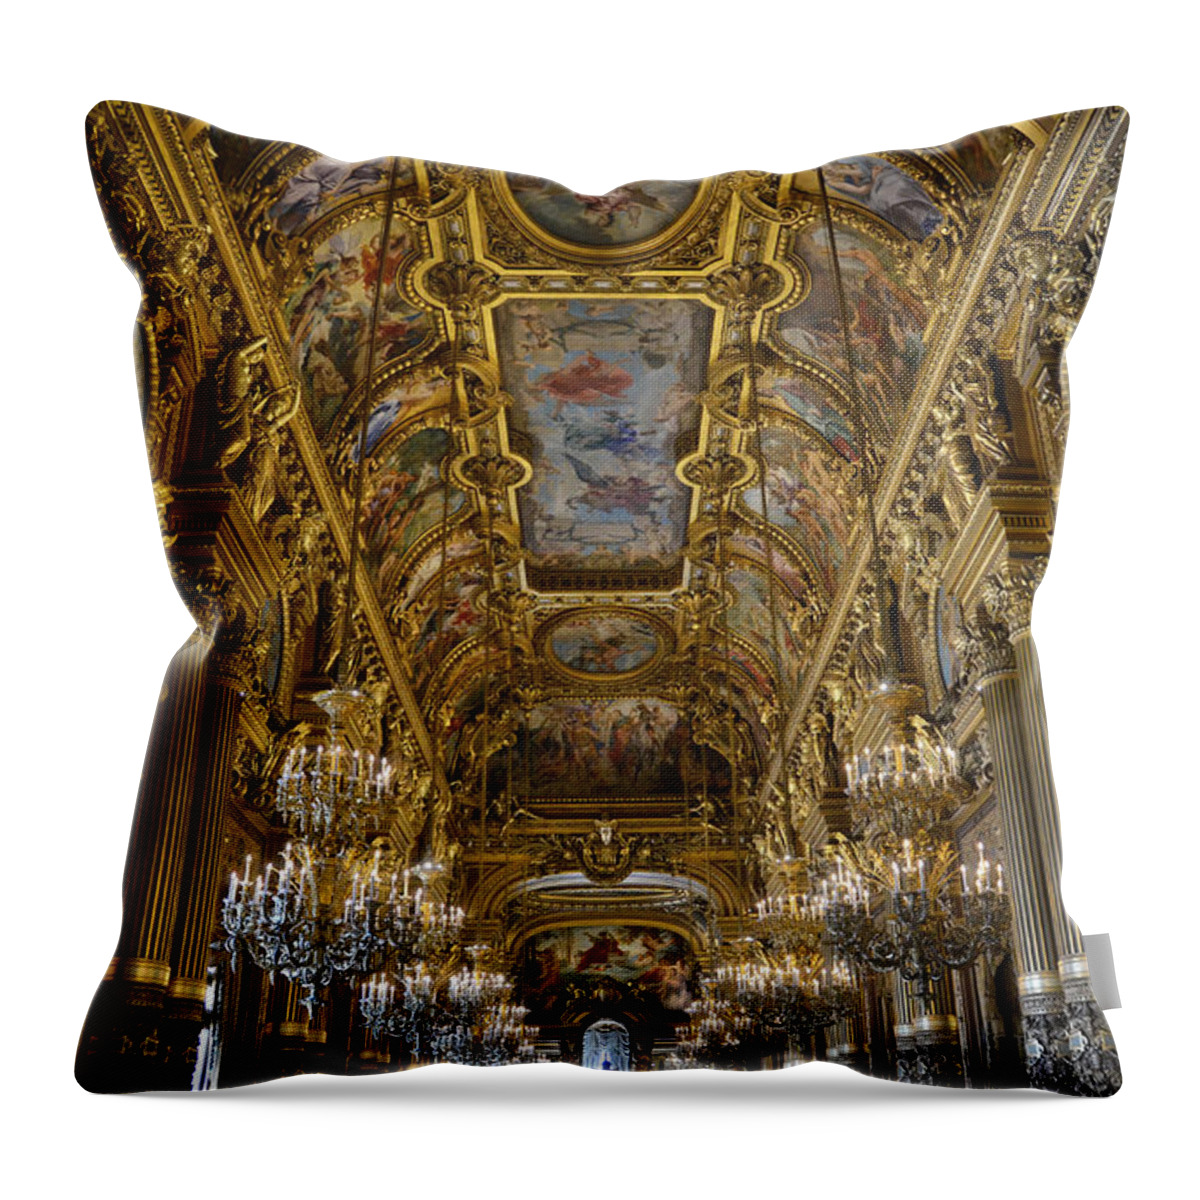 Paul Baudry Throw Pillow featuring the photograph Opera Garnier - The Grand Foyer by RicardMN Photography